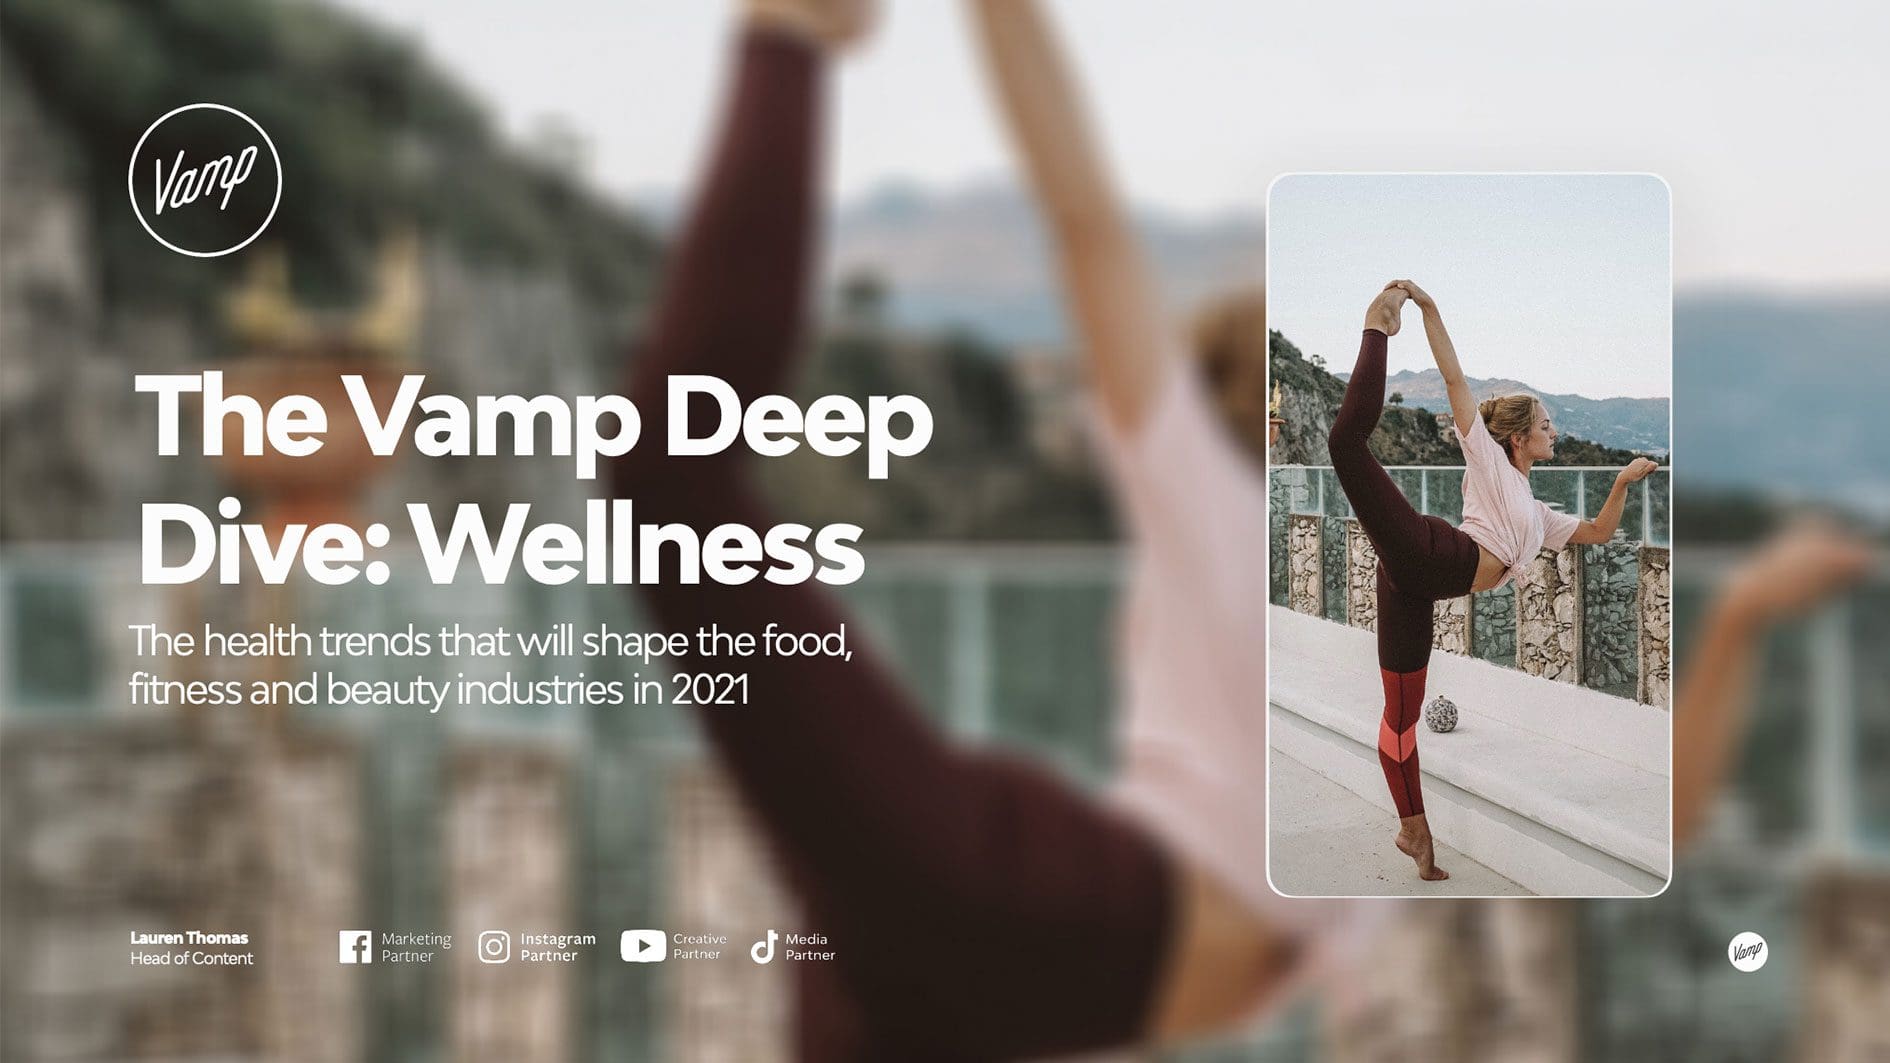 Download-our-free-Deep-Dive-report-on-wellness-trends